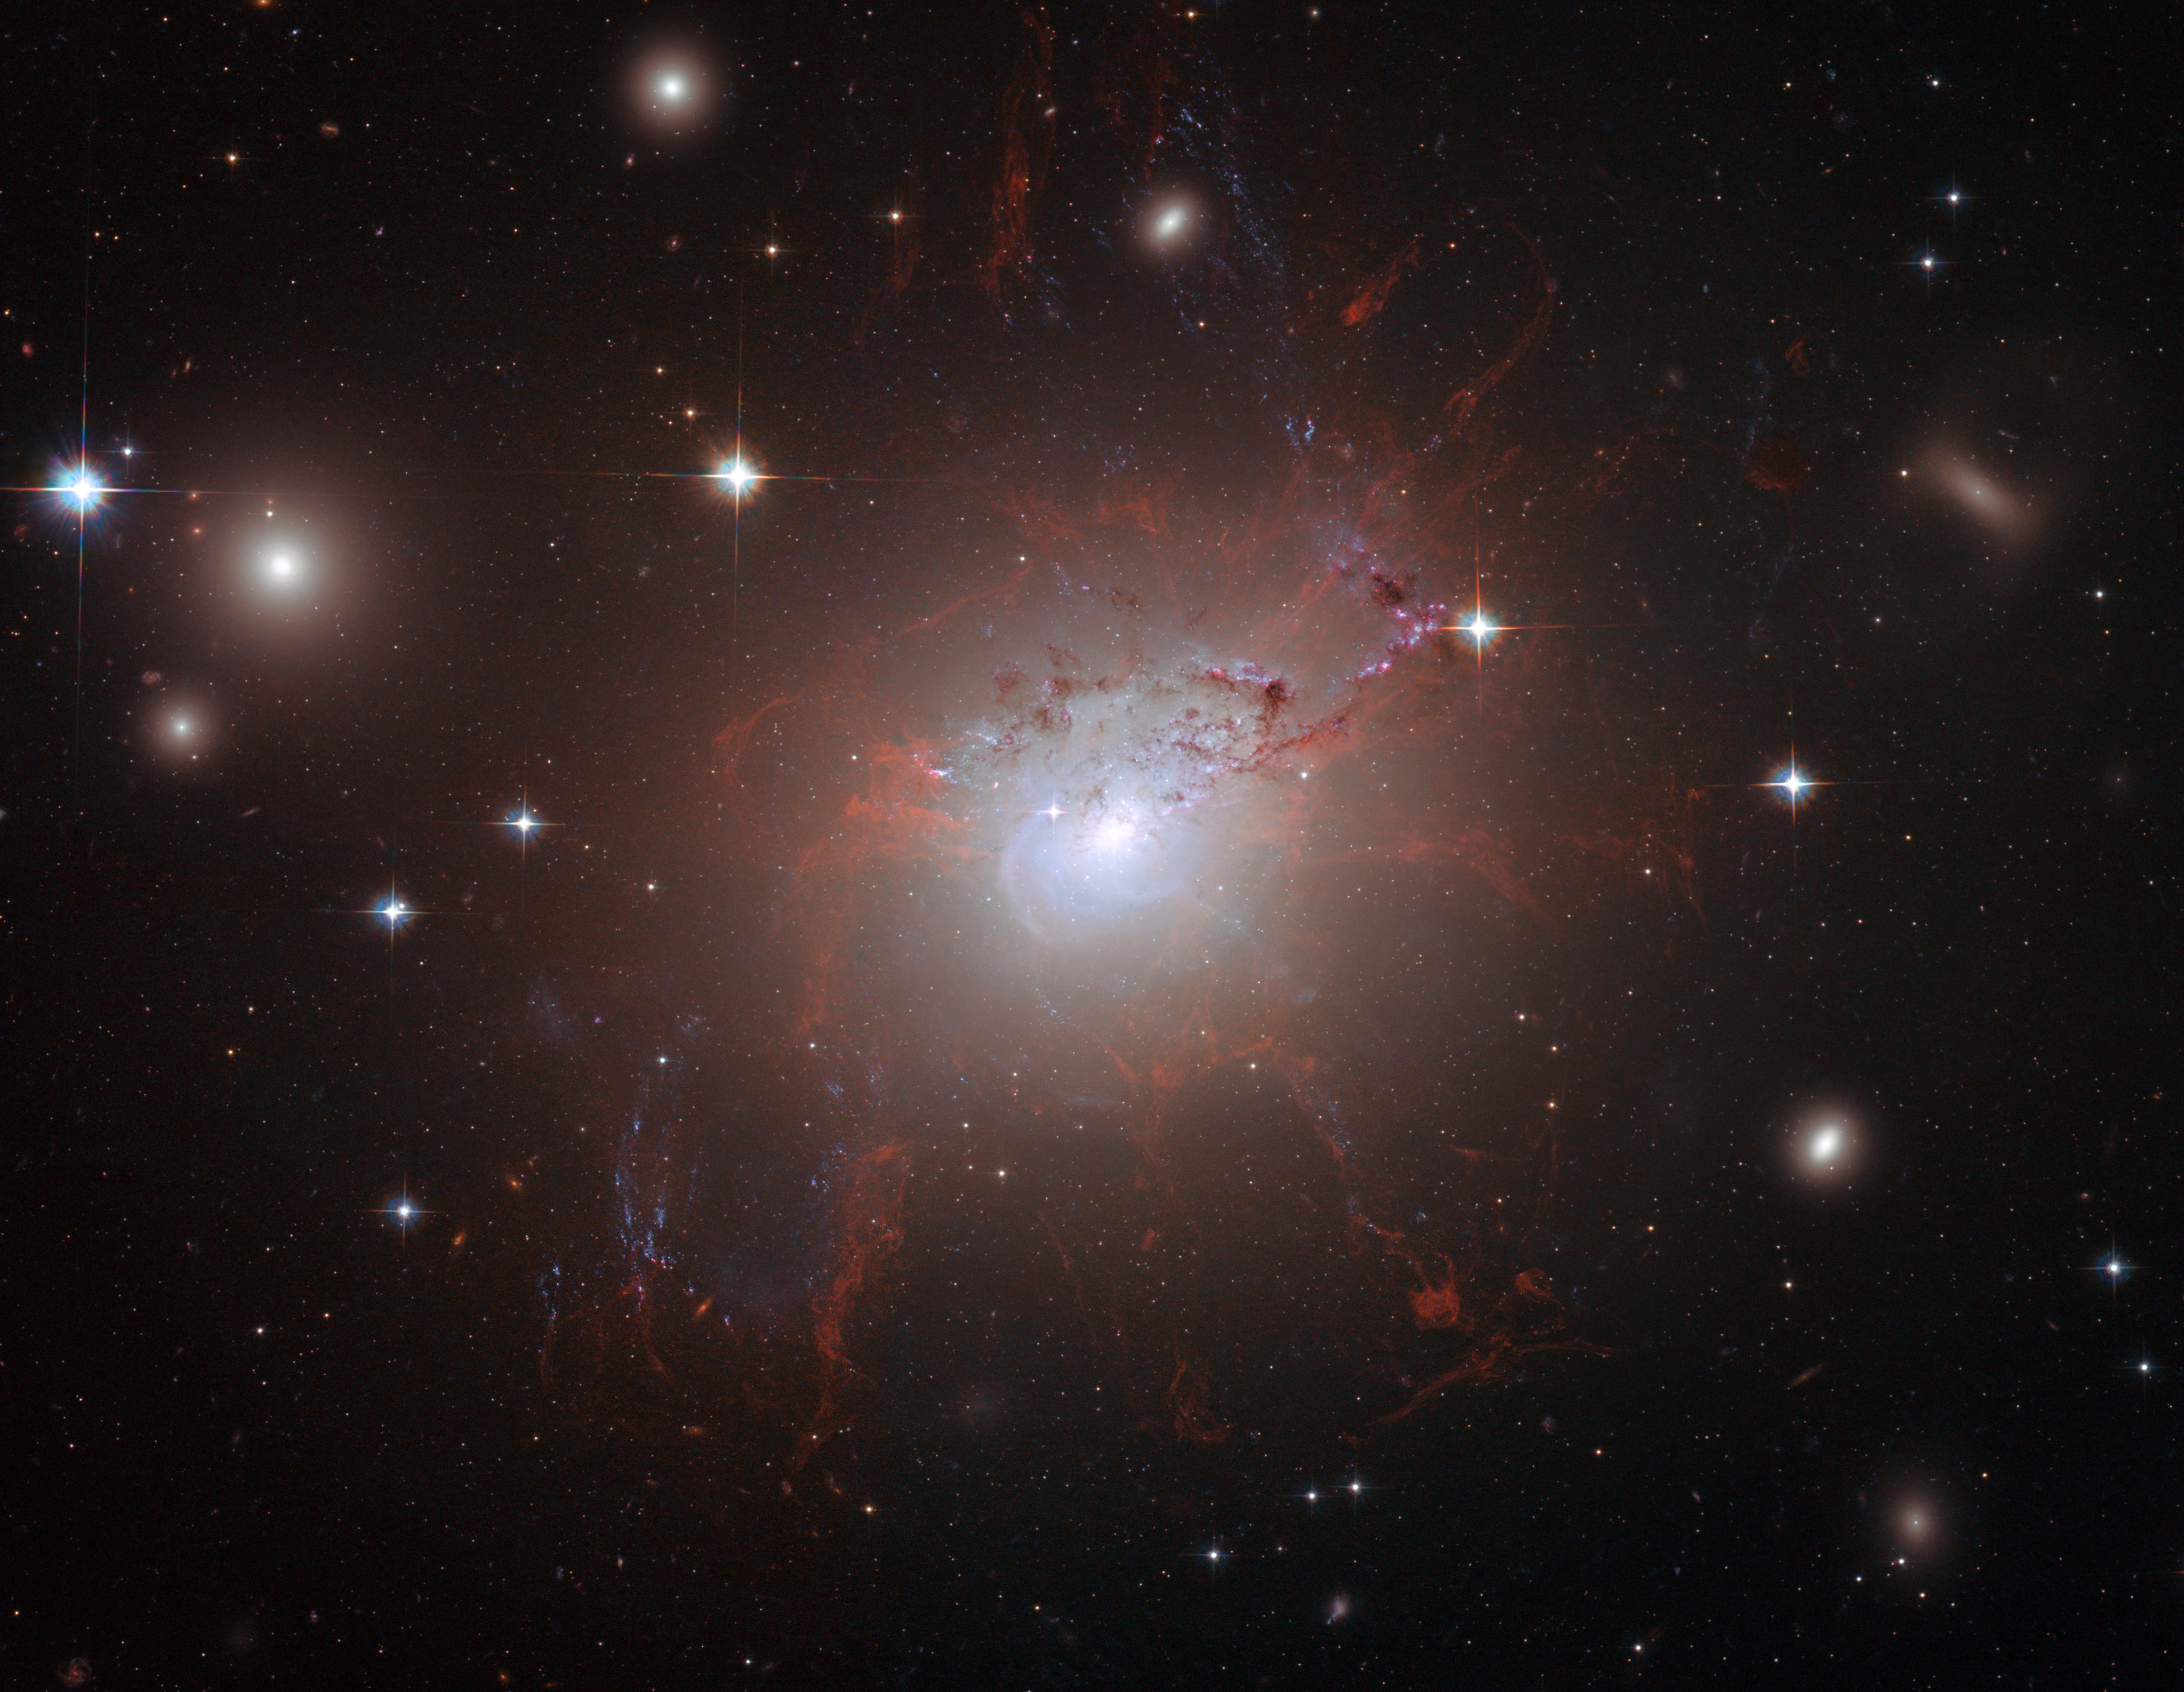 A galaxy with red filaments of gas protruding from it in multiple directions.